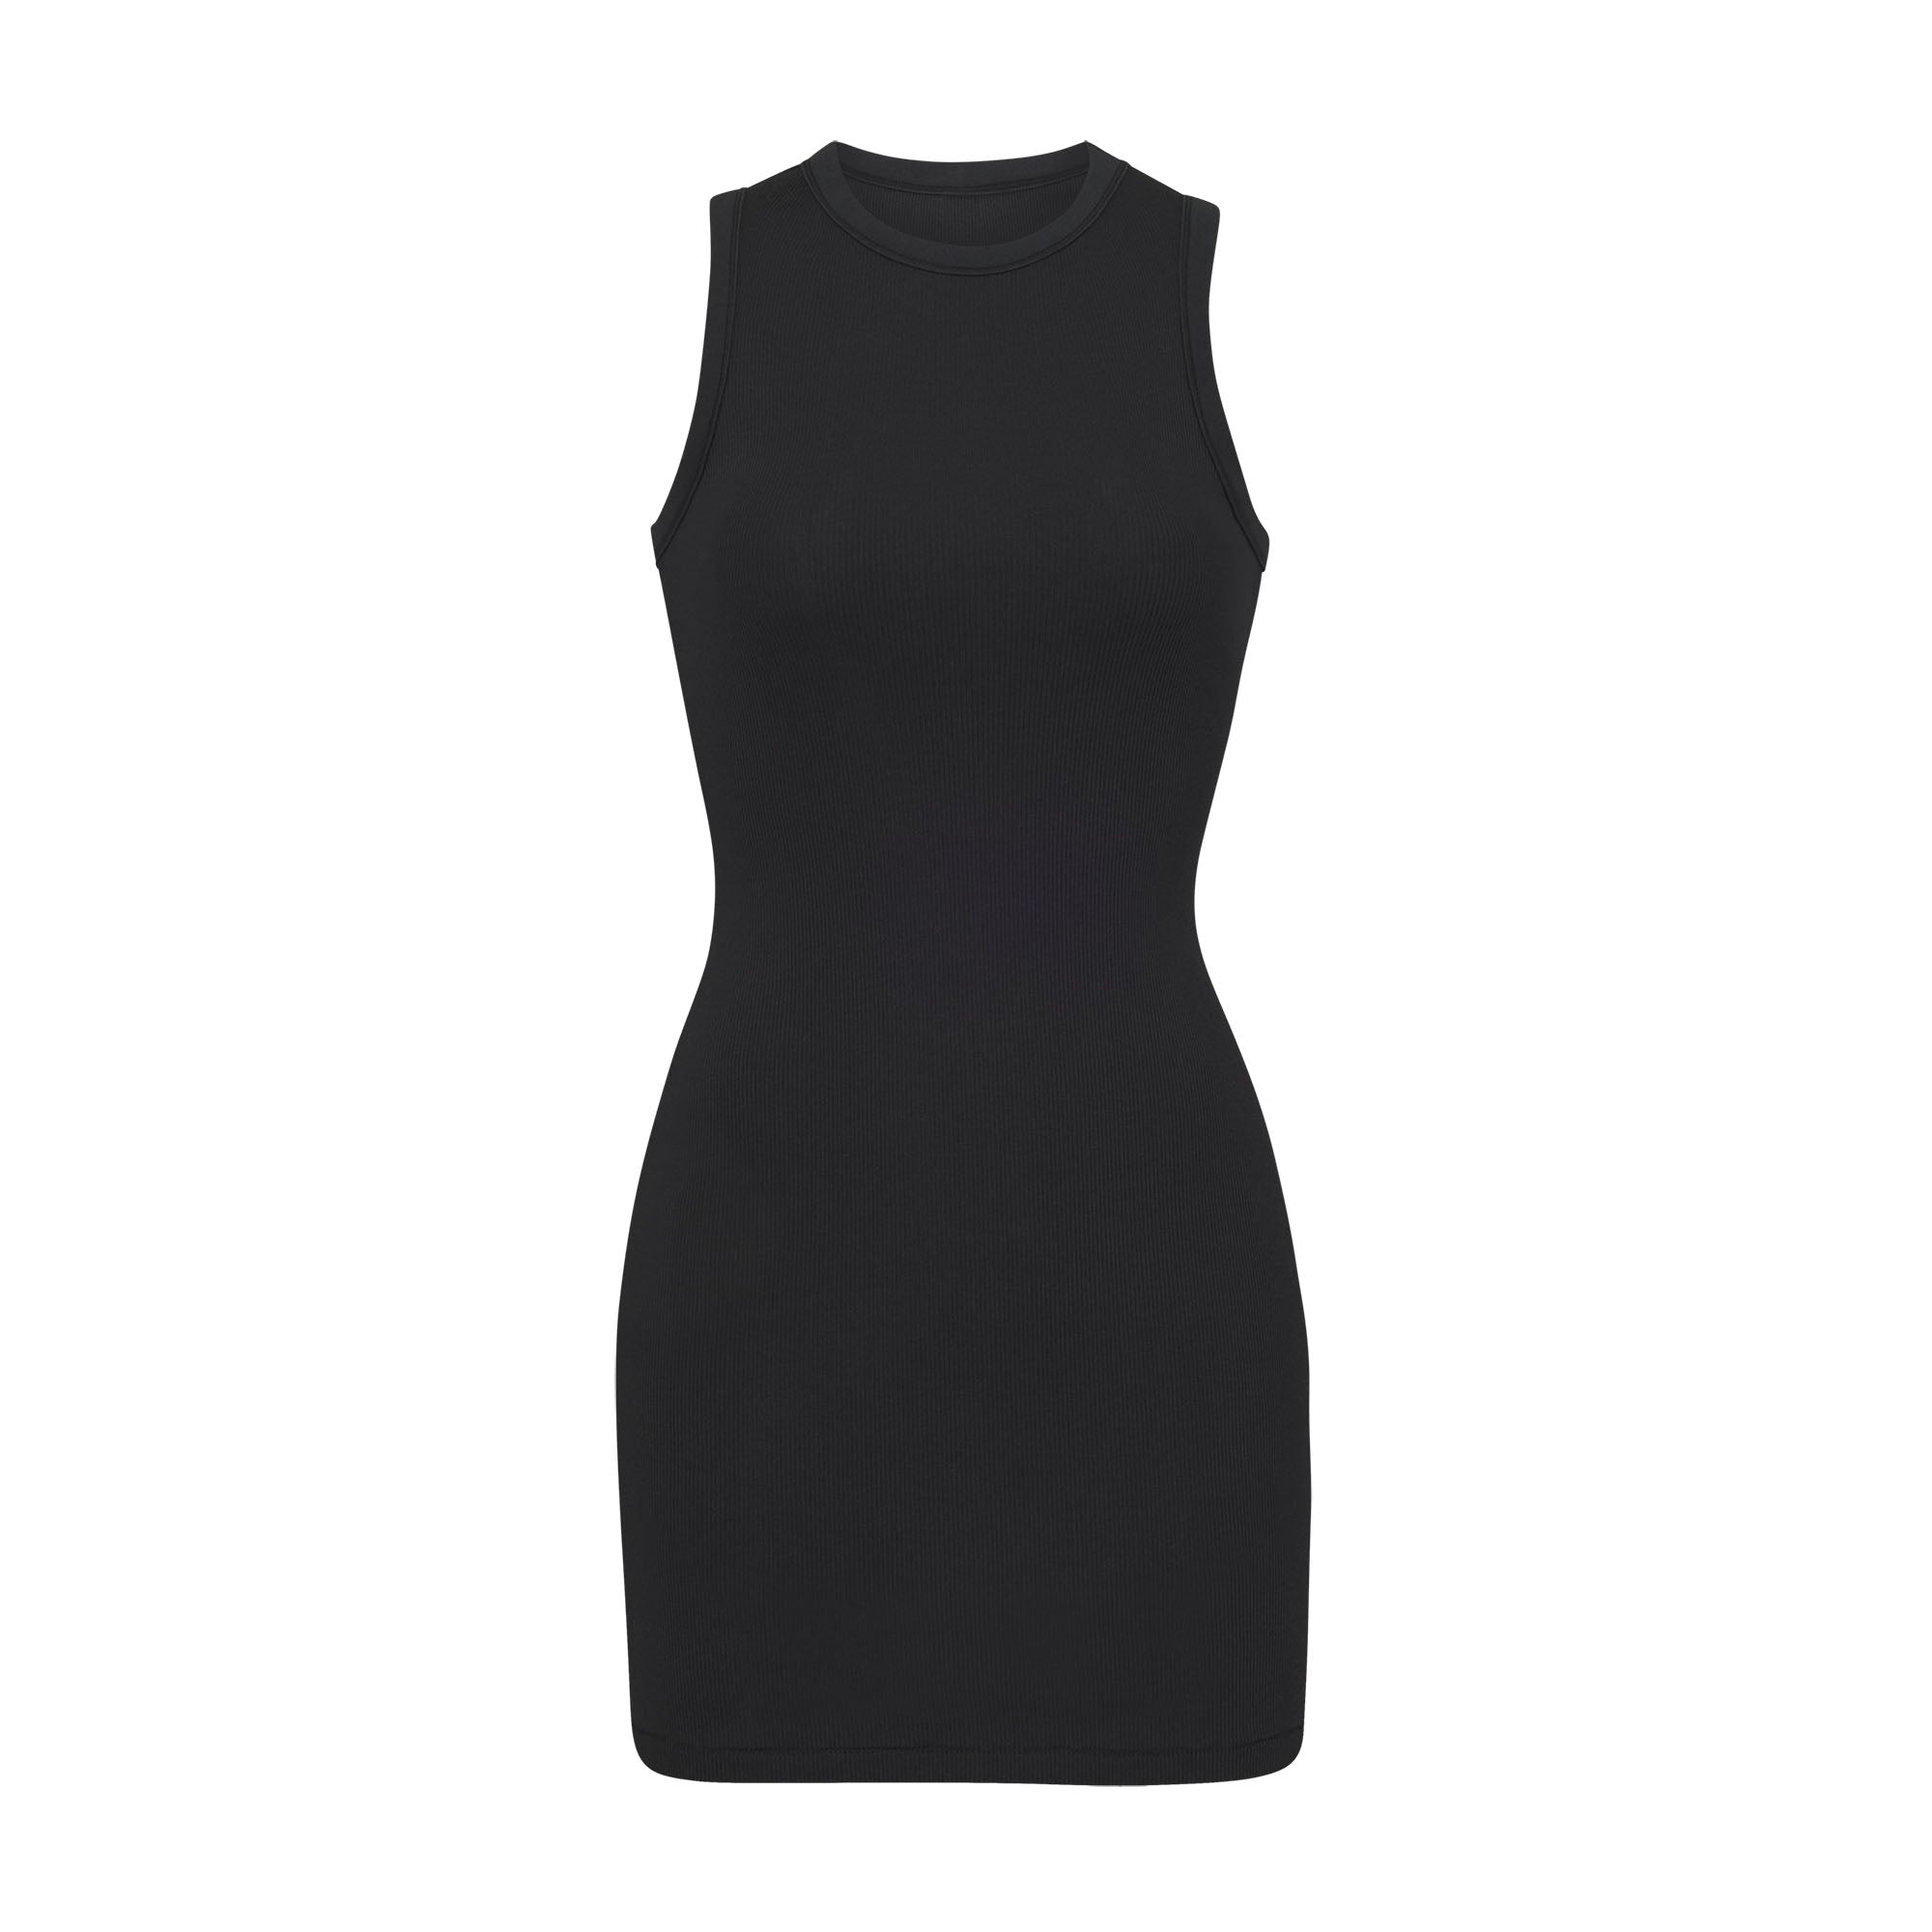 Skims Cotton Rib Tank Dress In Stock Availability and Price Tracking